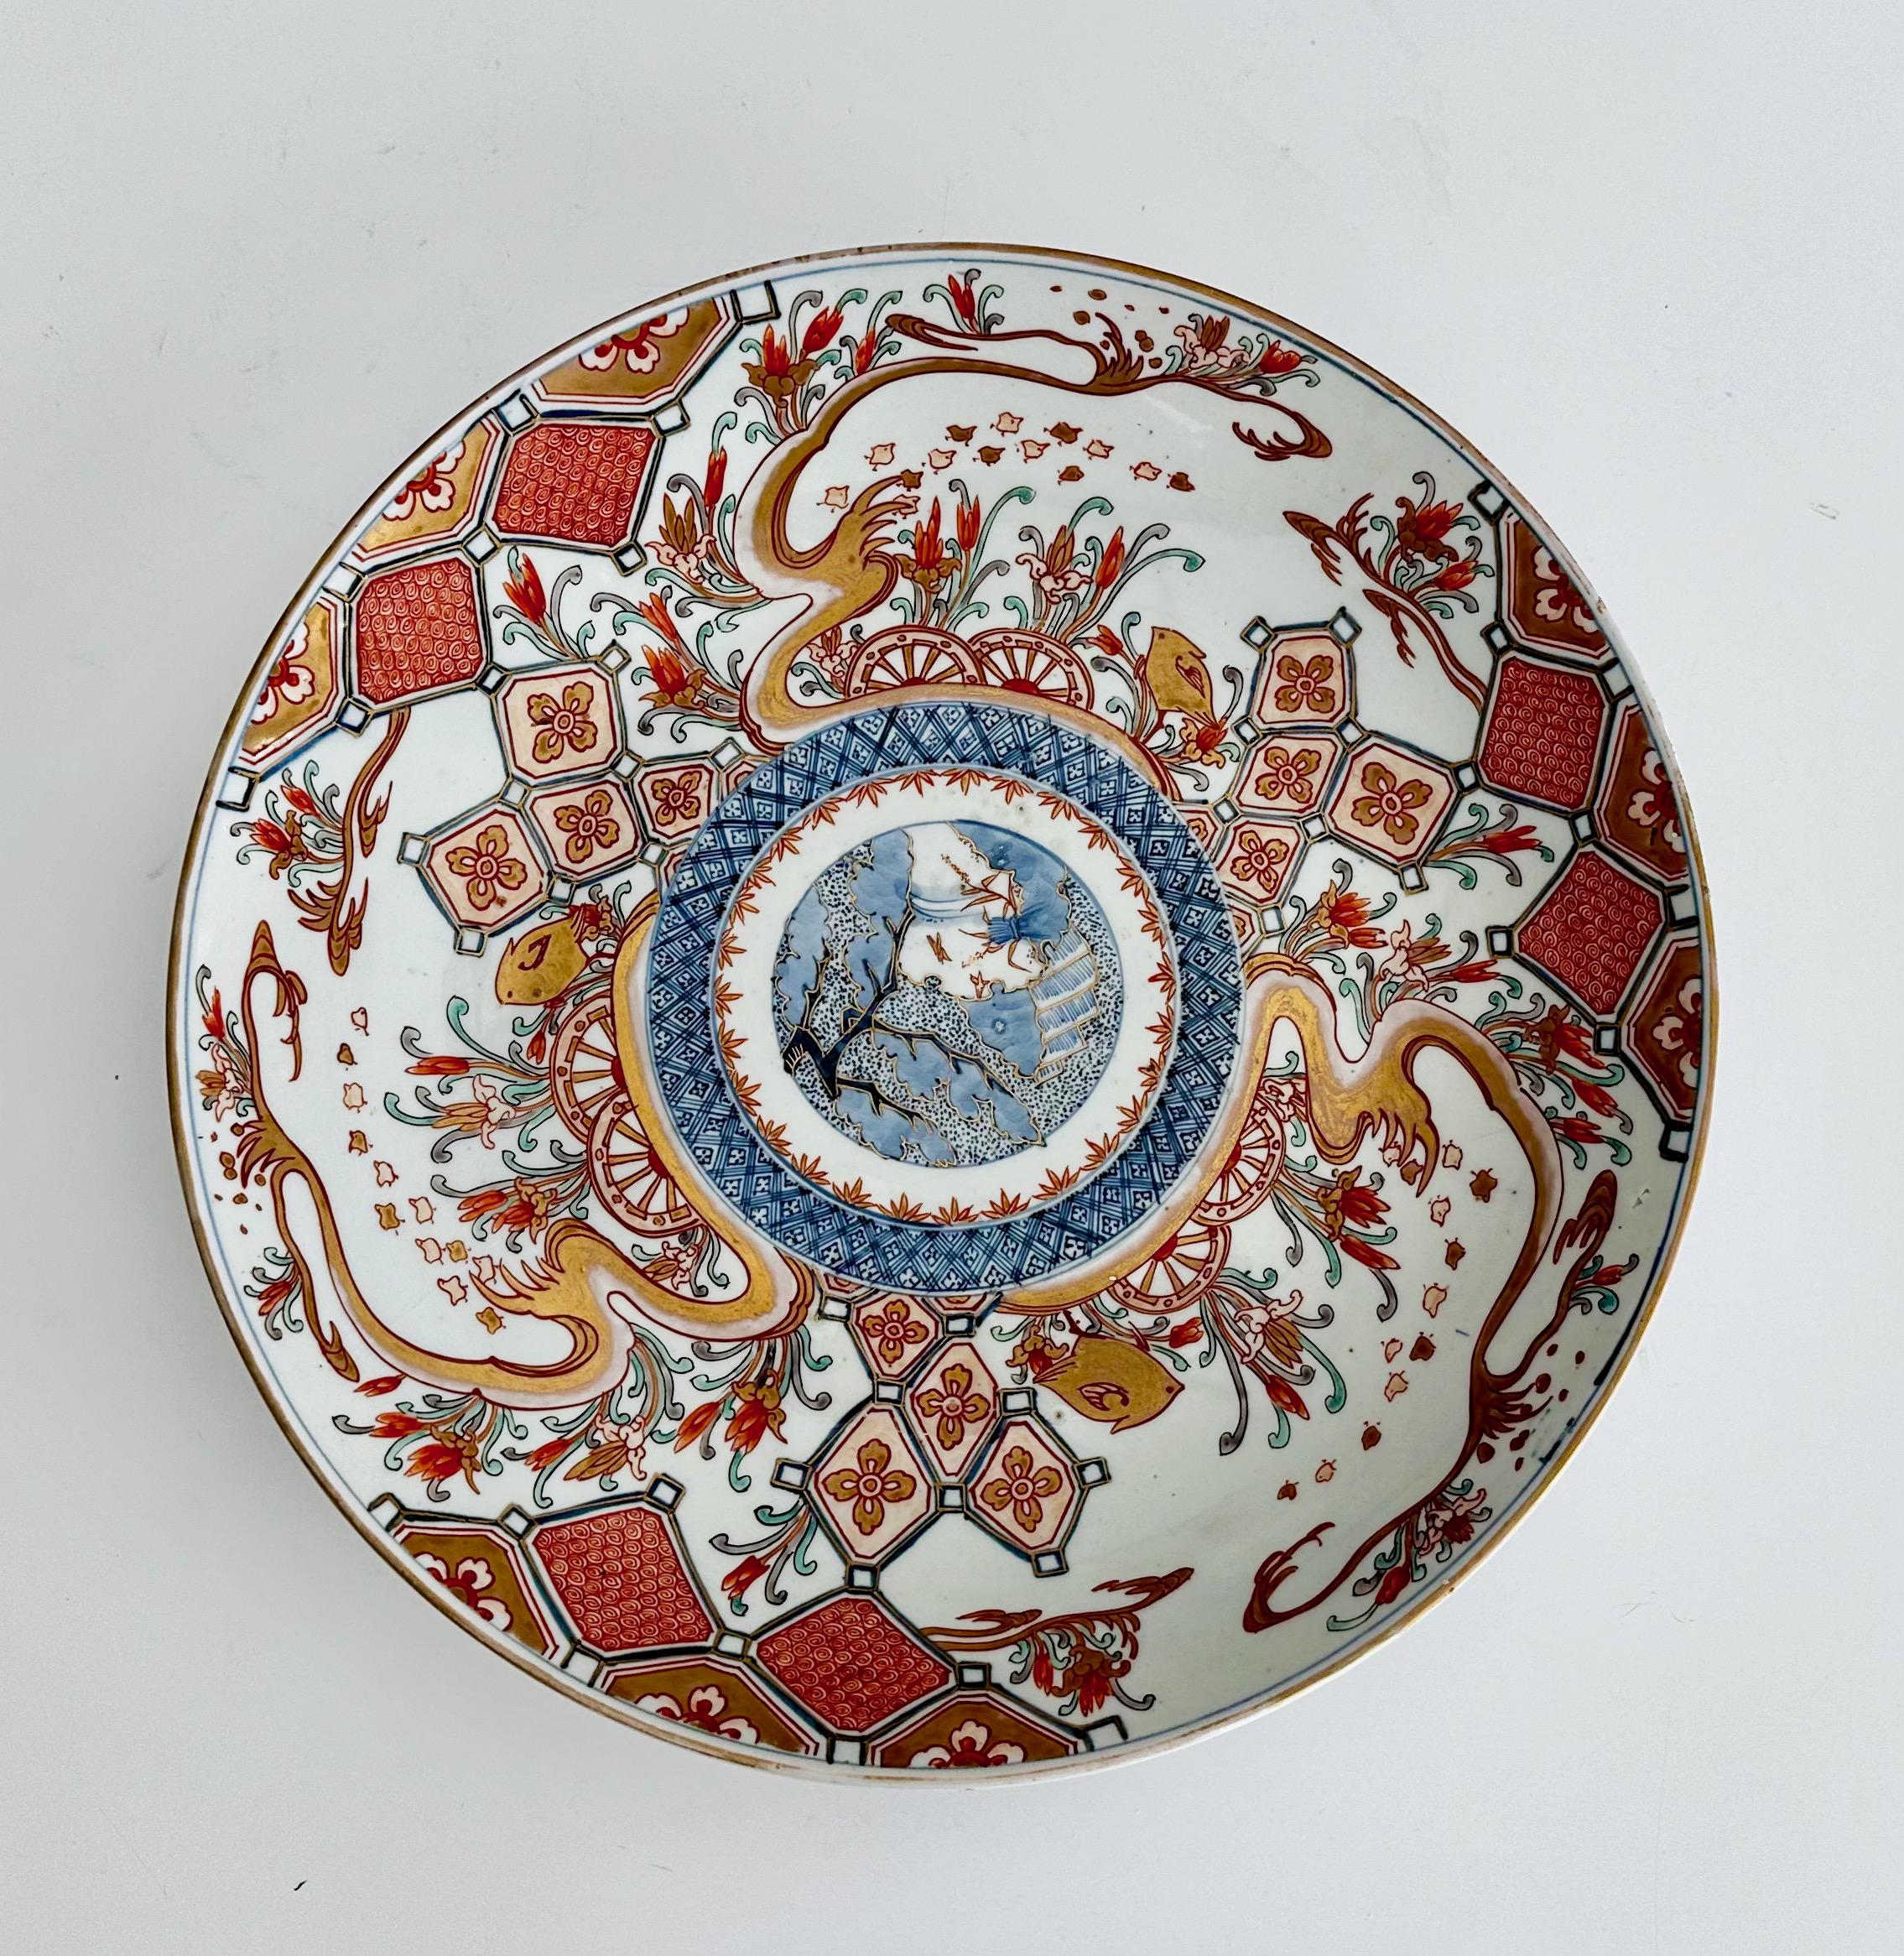 Hand painted porcelain Japanese Imari charger plate with birds, tree branches and floral motif.